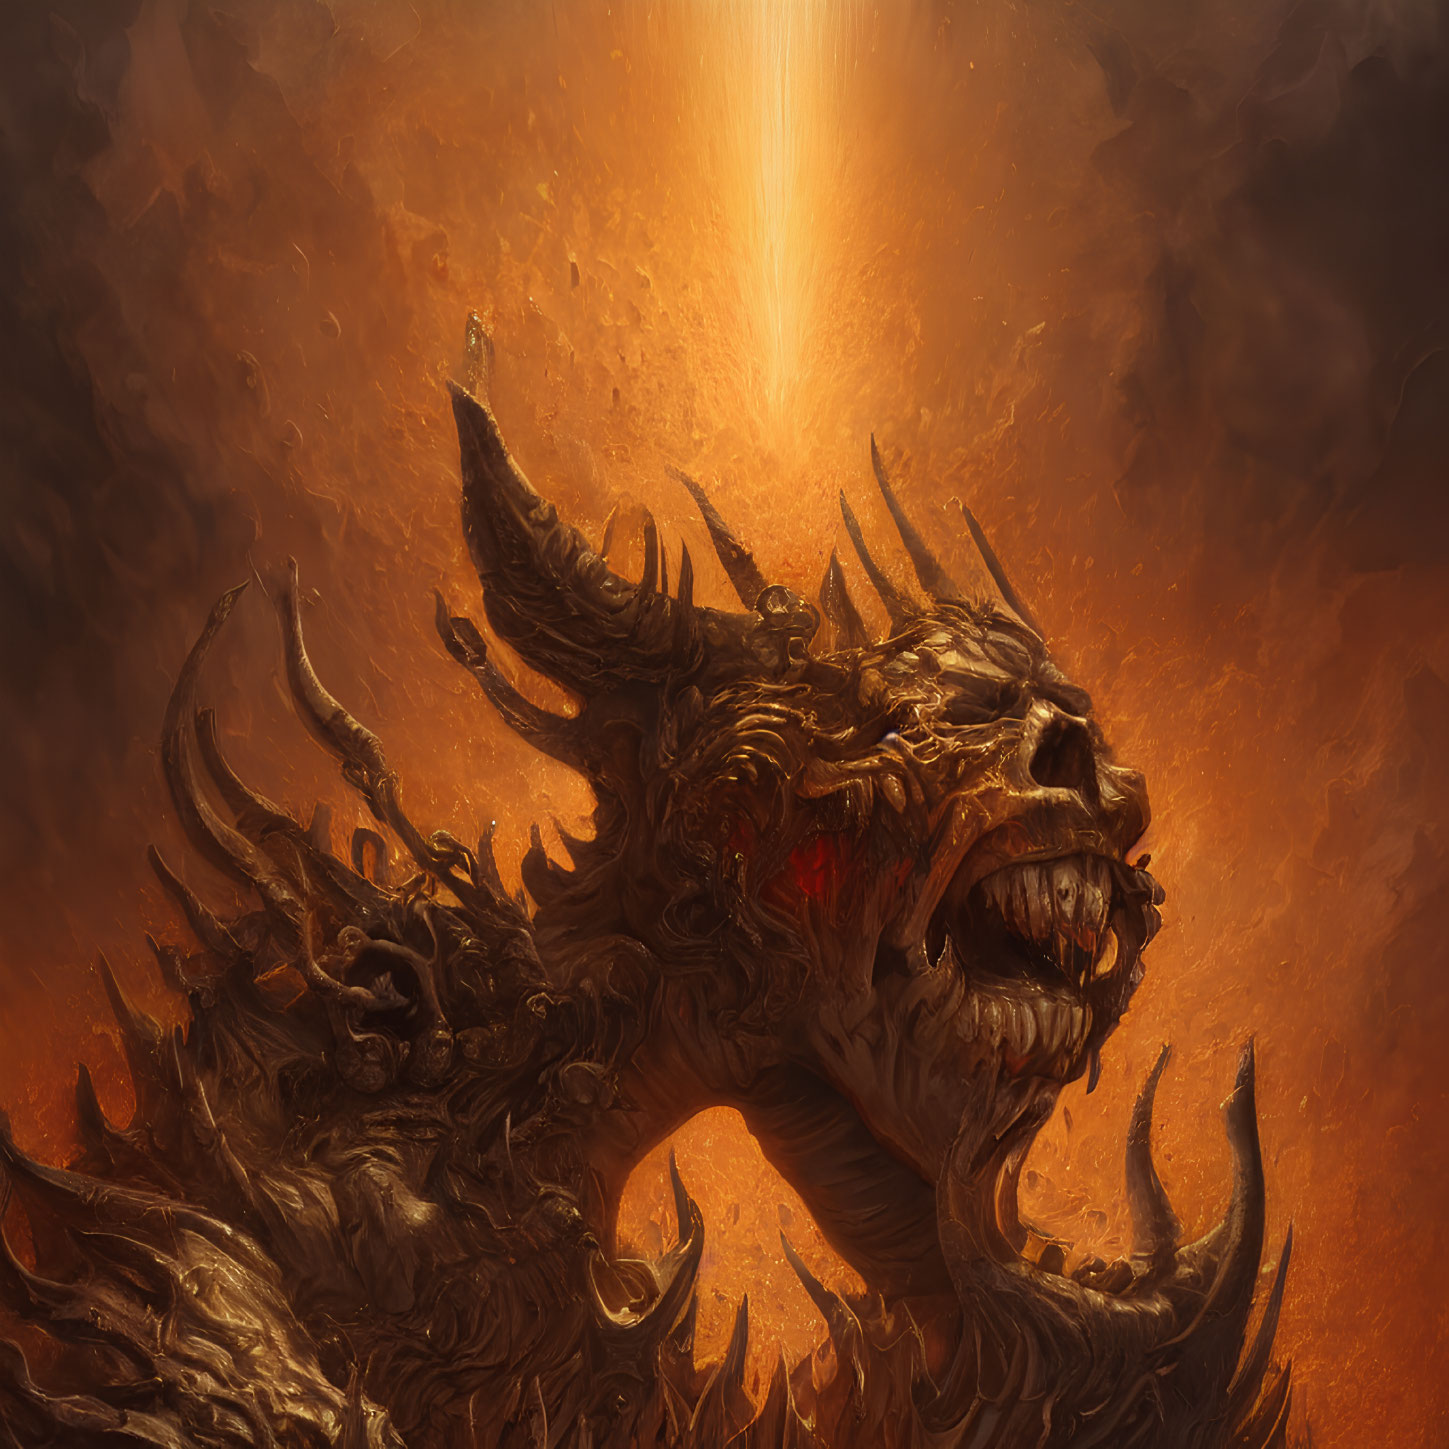 Majestic dragon with horns and red eyes in fiery setting